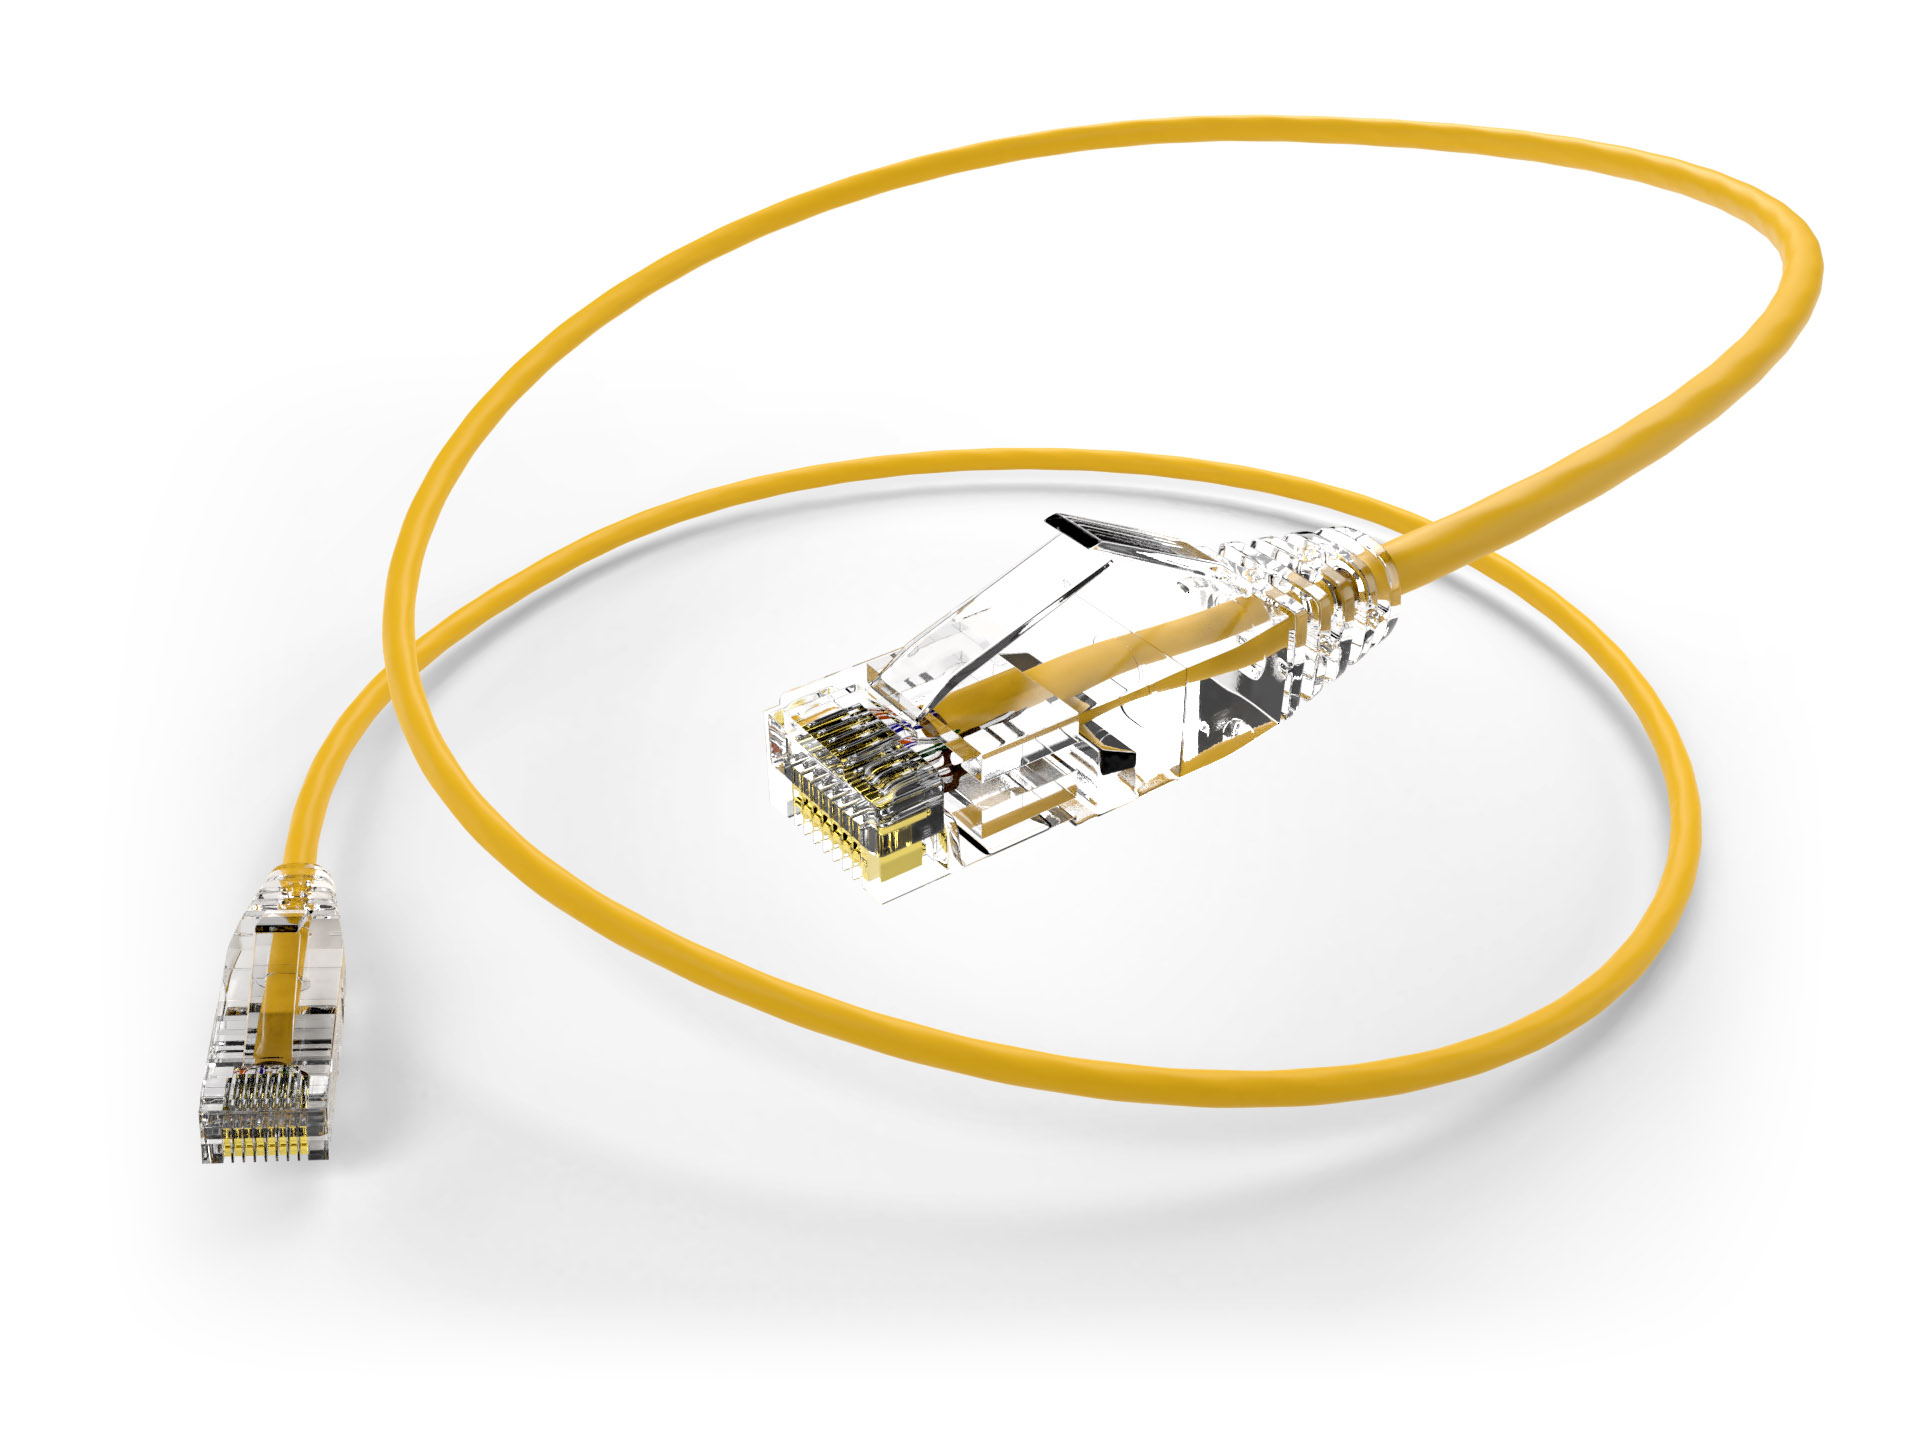 image of a 28AWG cat6a yellow patch cable connector